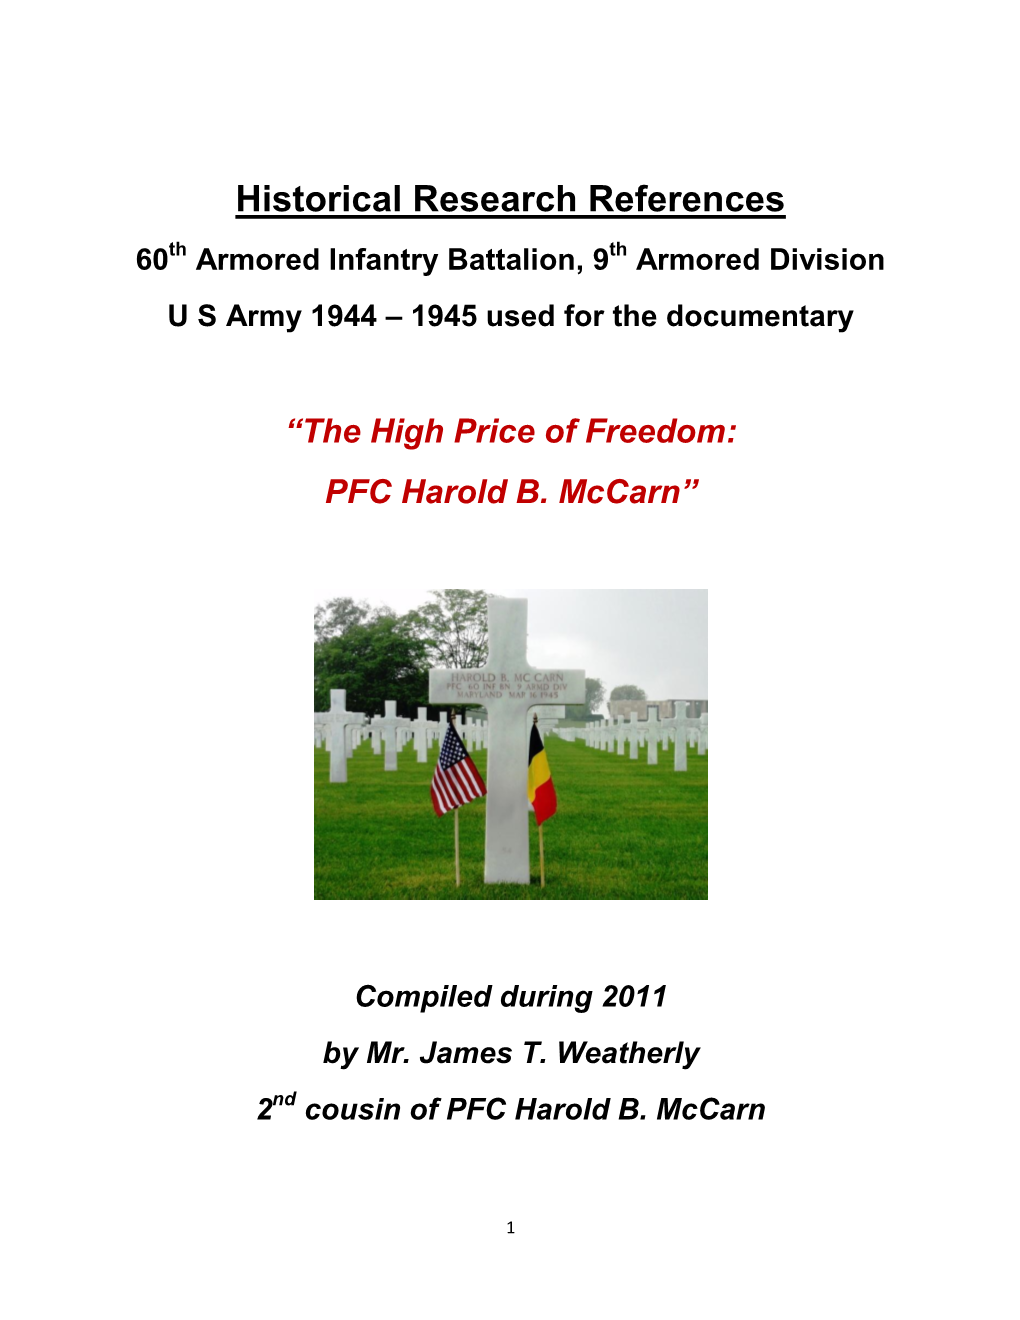 Historical Research References 60Th Armored Infantry Battalion, 9Th Armored Division U S Army 1944 – 1945 Used for the Documentary